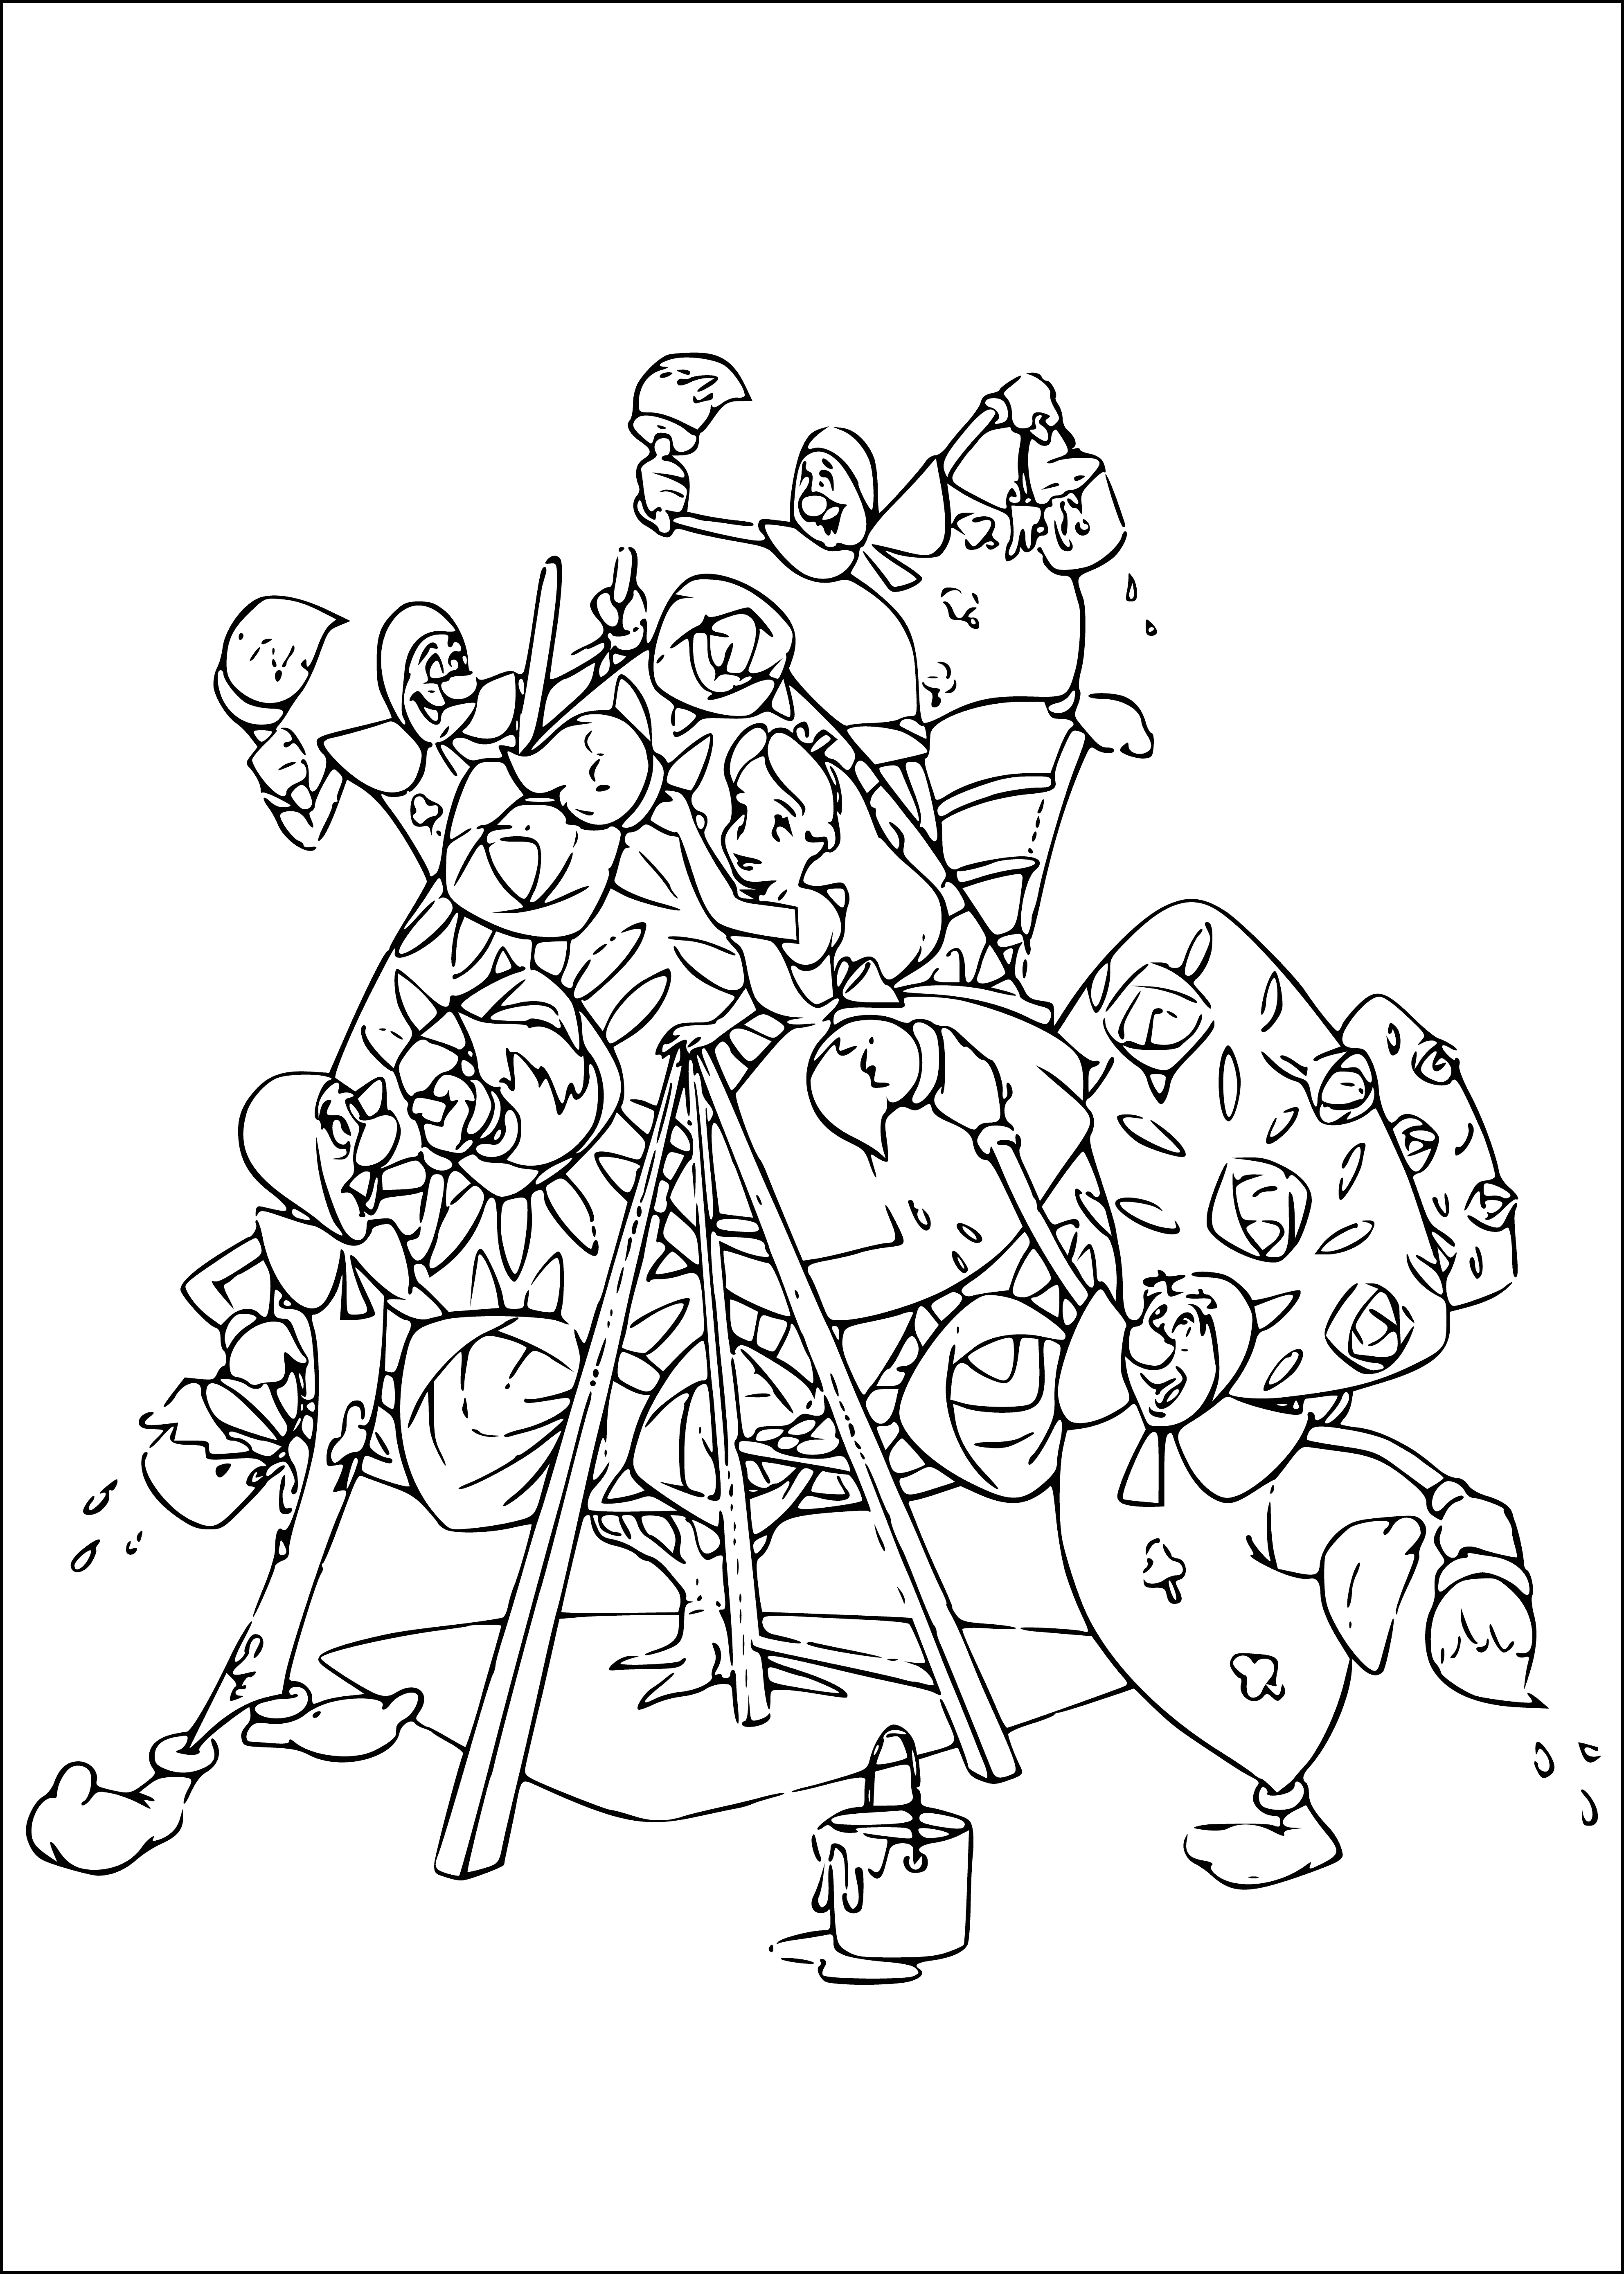 coloring page: White rabbit stands with clasped paws, wearing a waistcoat & pocket watch, surrounded by red roses. Blue sky, white clouds in background.